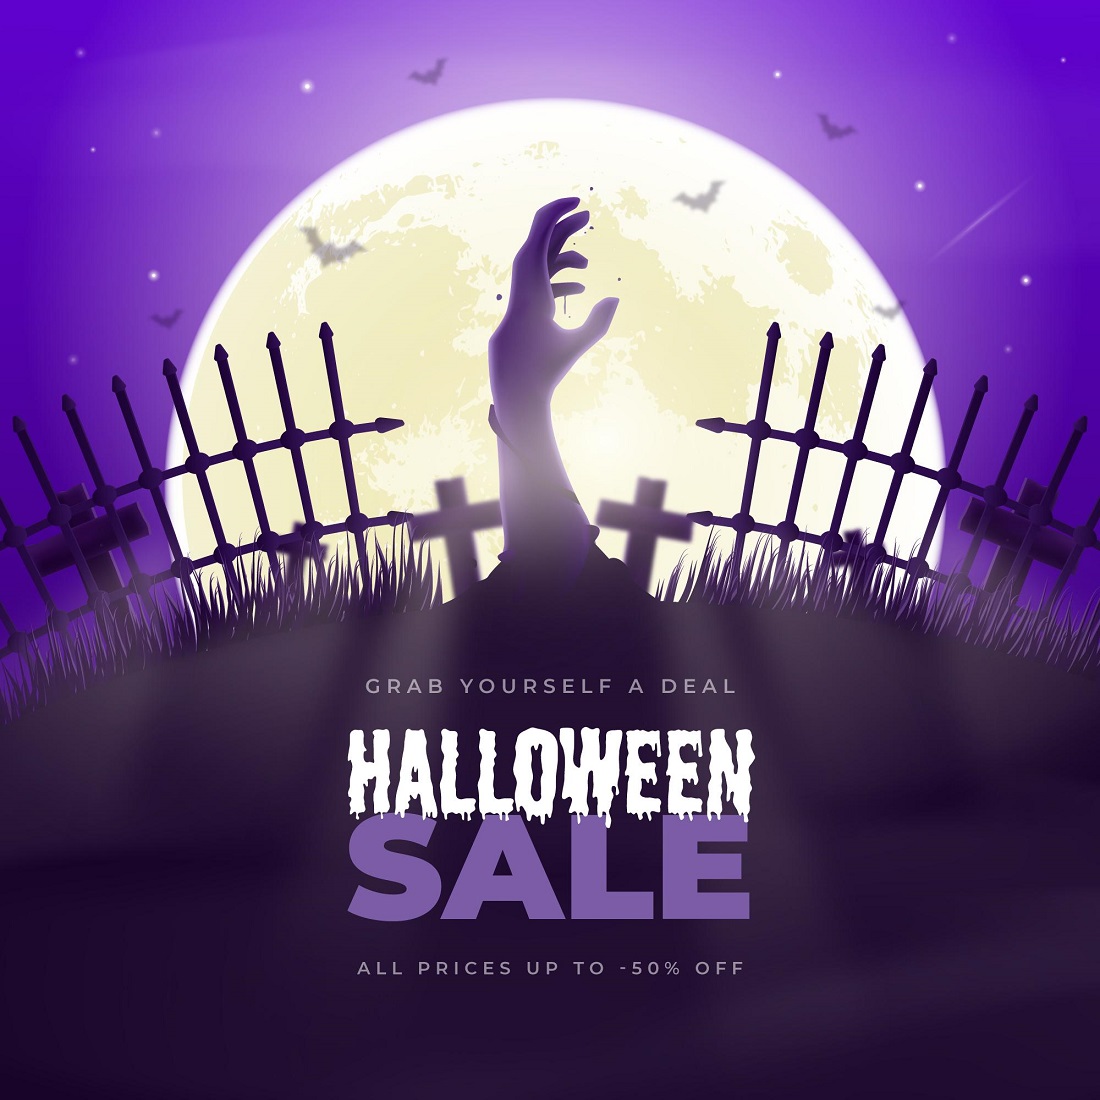 Realistic Halloween sale illustration with cemetery cover image.